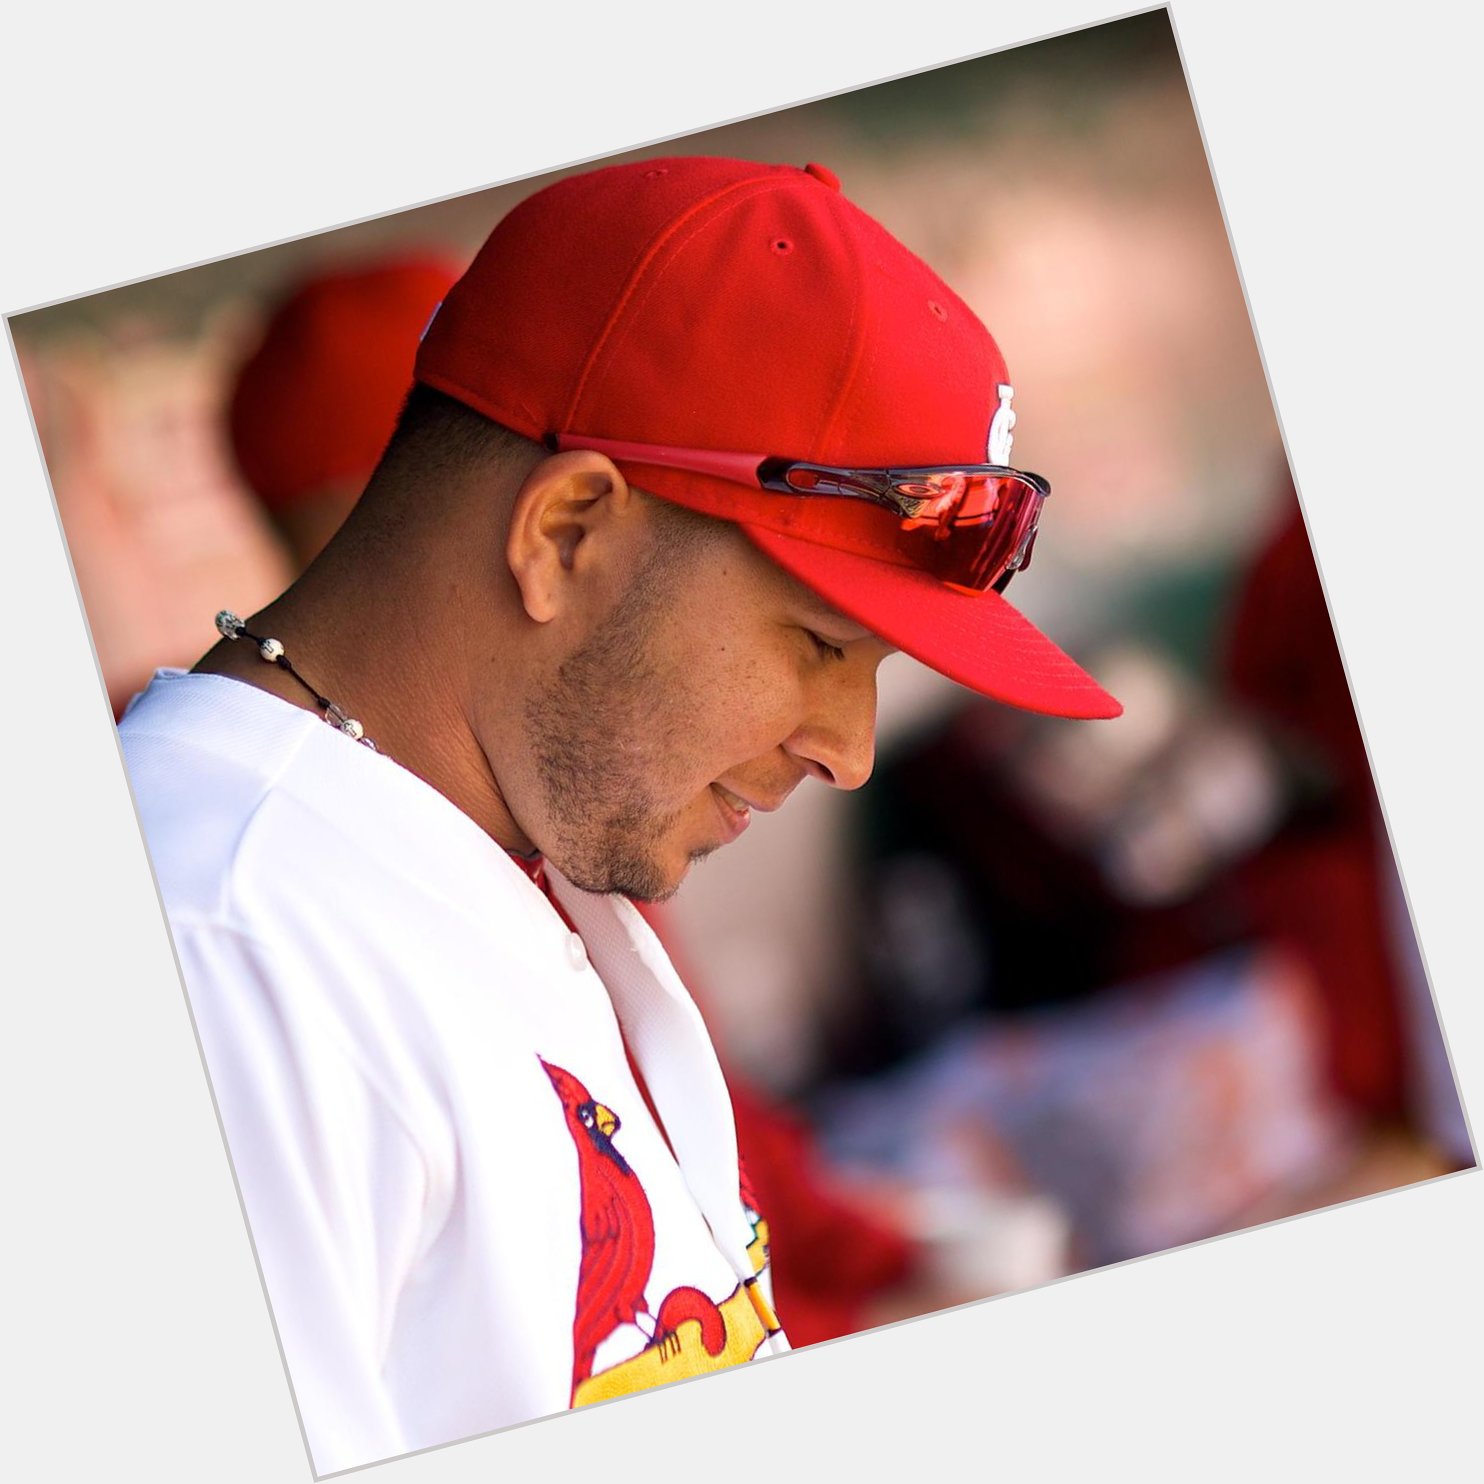 Join us in wishing a Happy 33rd Birthday to shortstop Jhonny Peralta! 